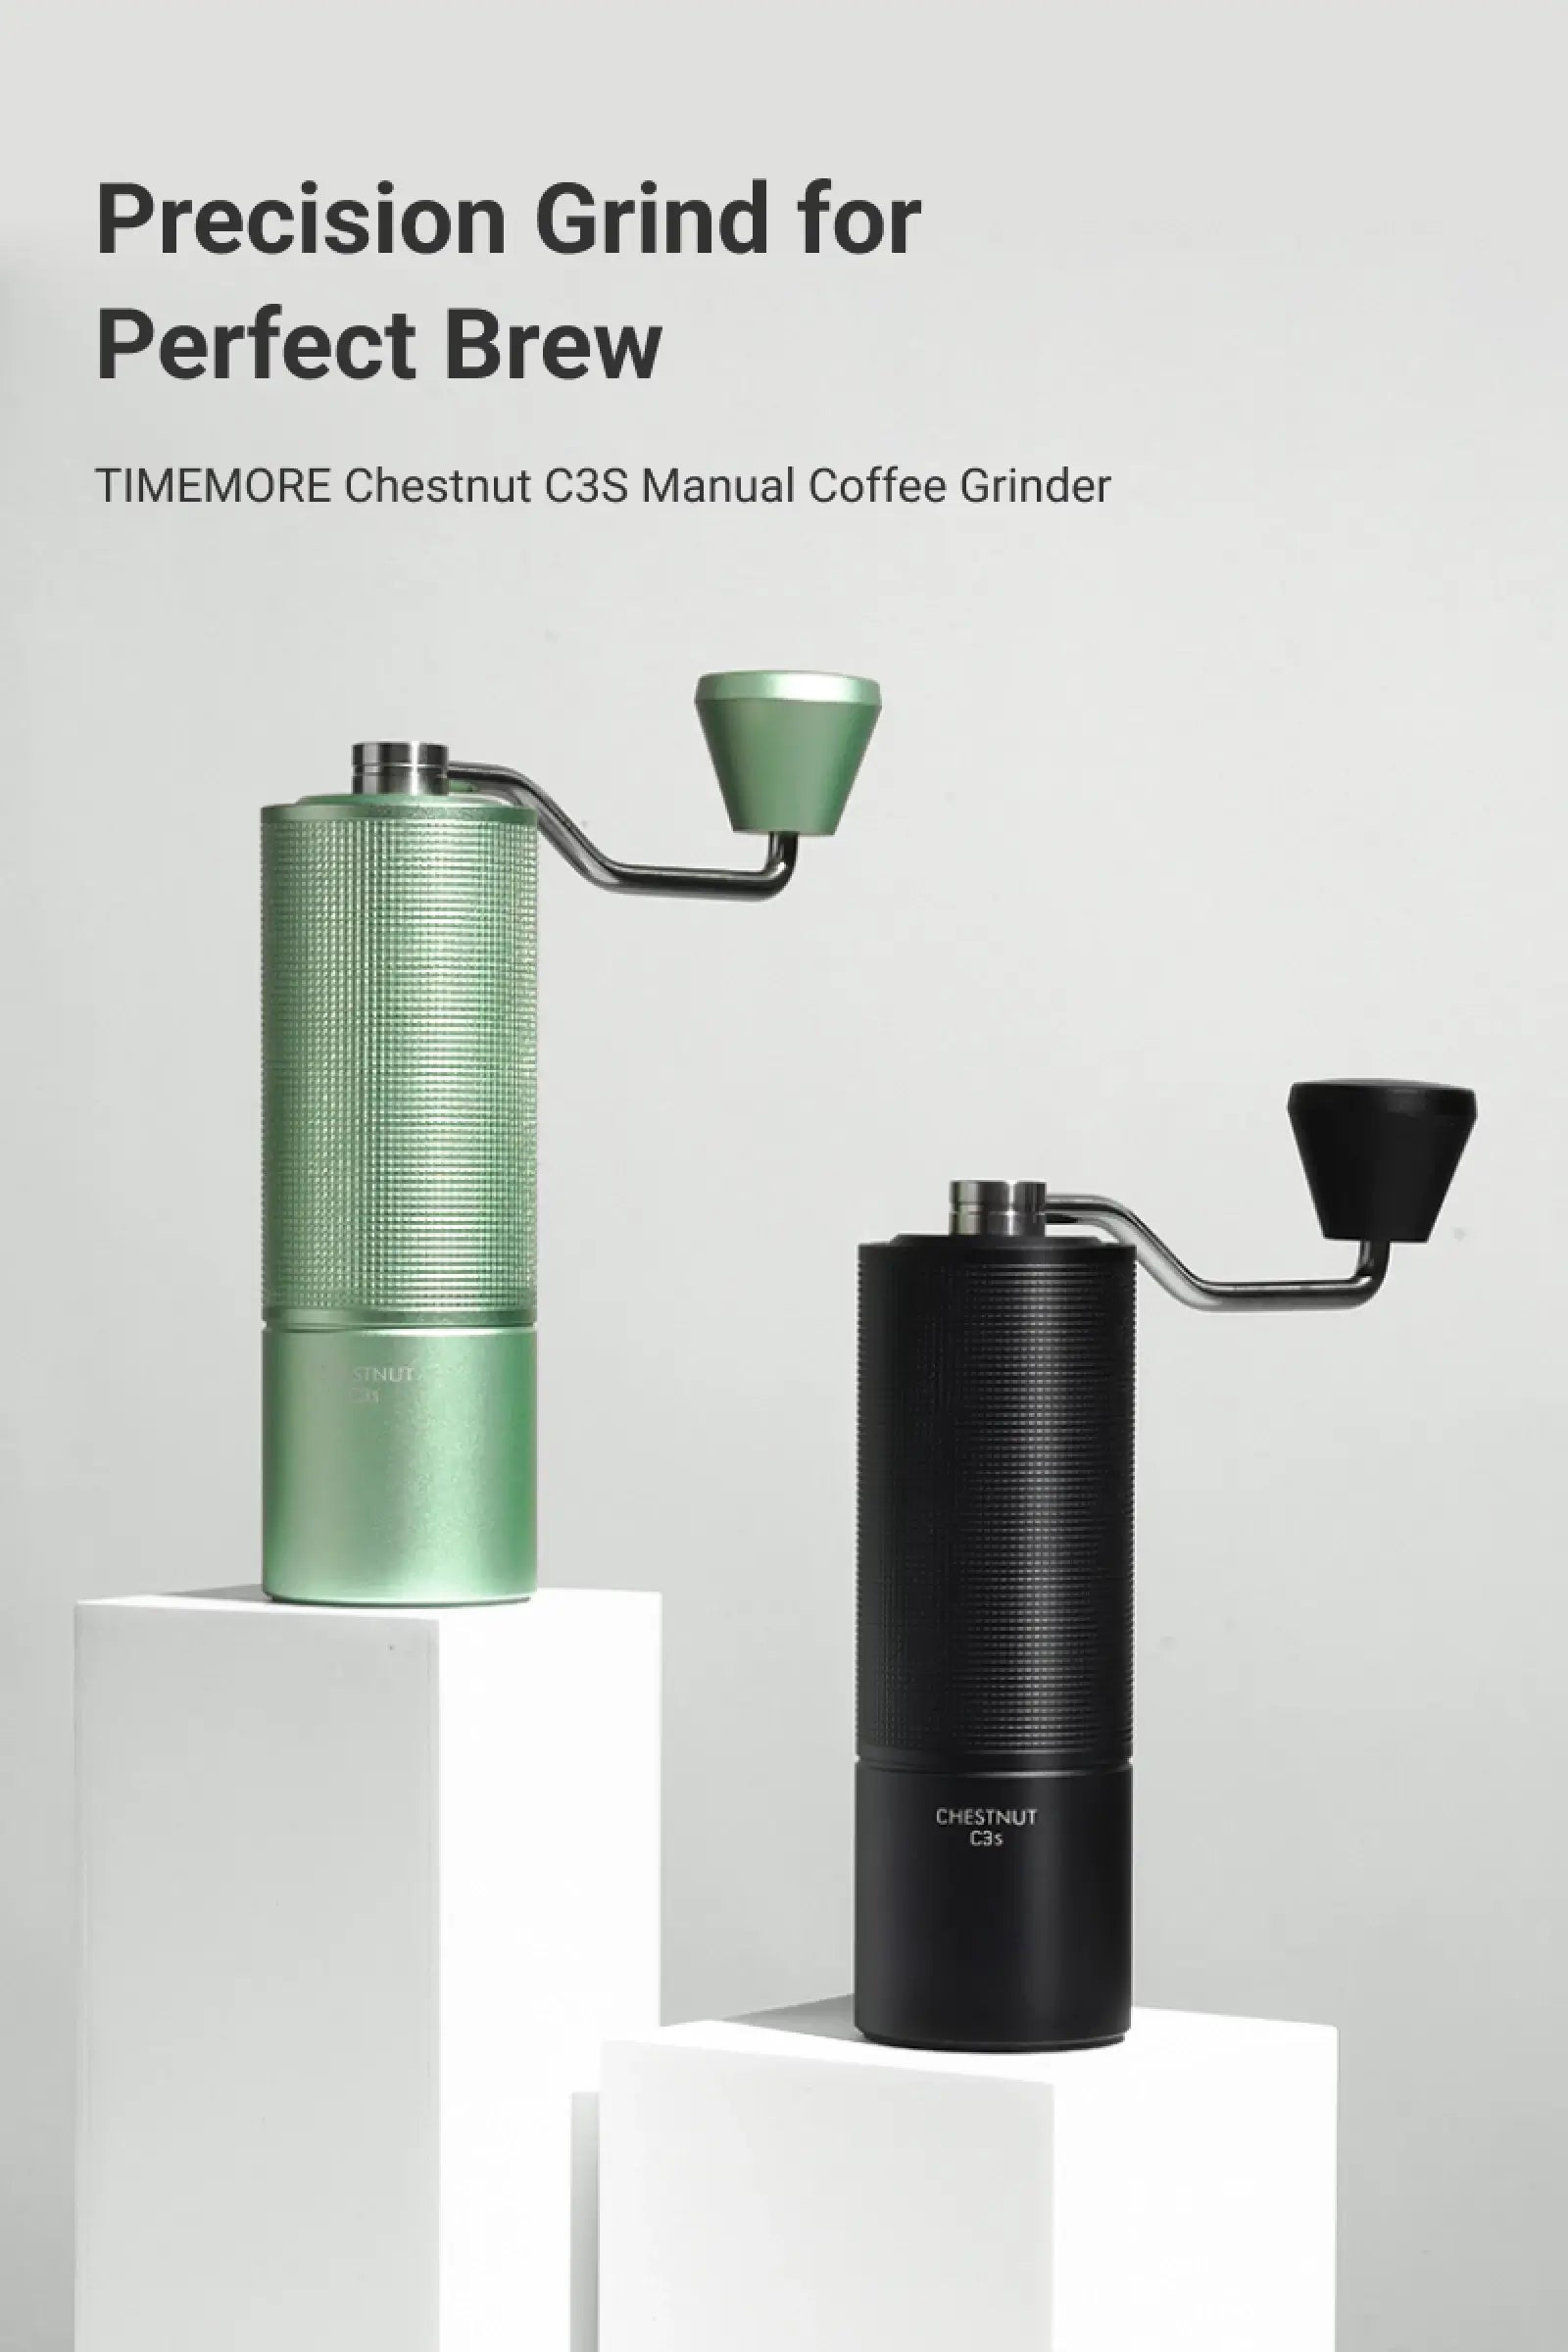 TIMEMORE Chestnut C3S Manual Coffee Grinder with Adjustable Grind Setting